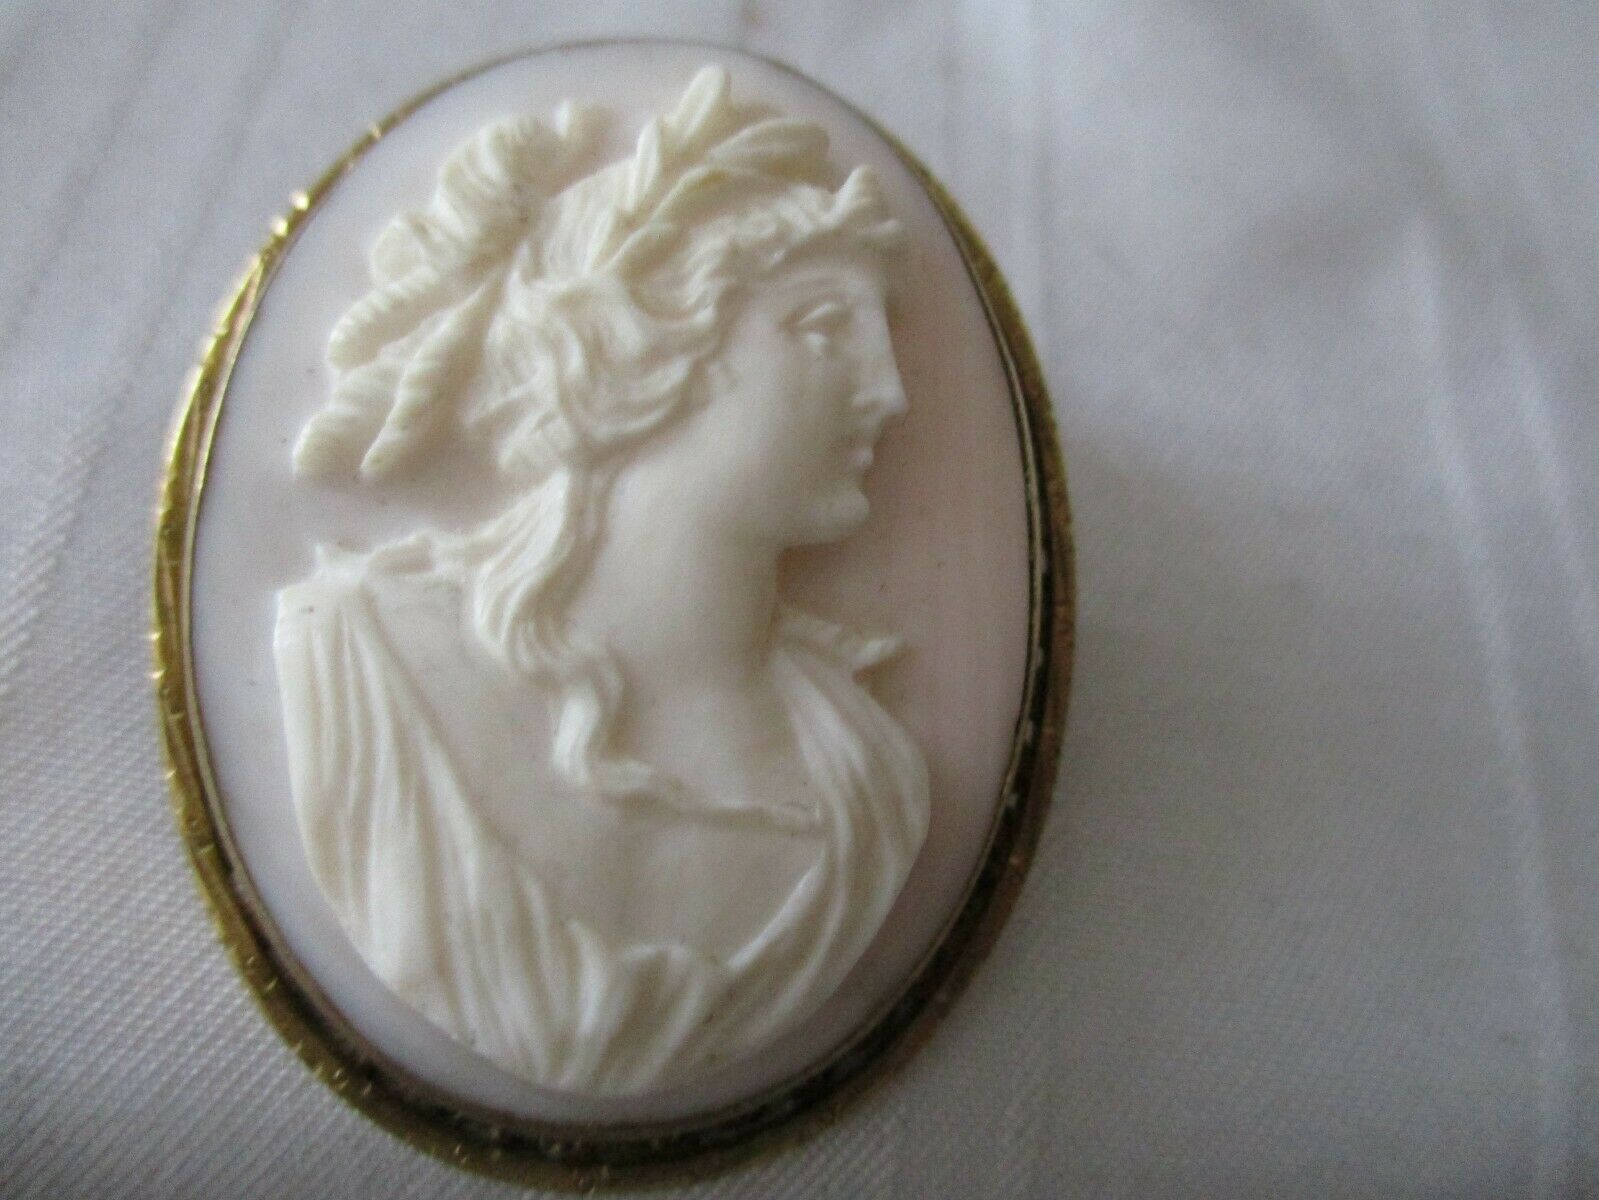 Antique 10k Yellow Gold Hand Carved Cameo Brooch Pendant 1.5"